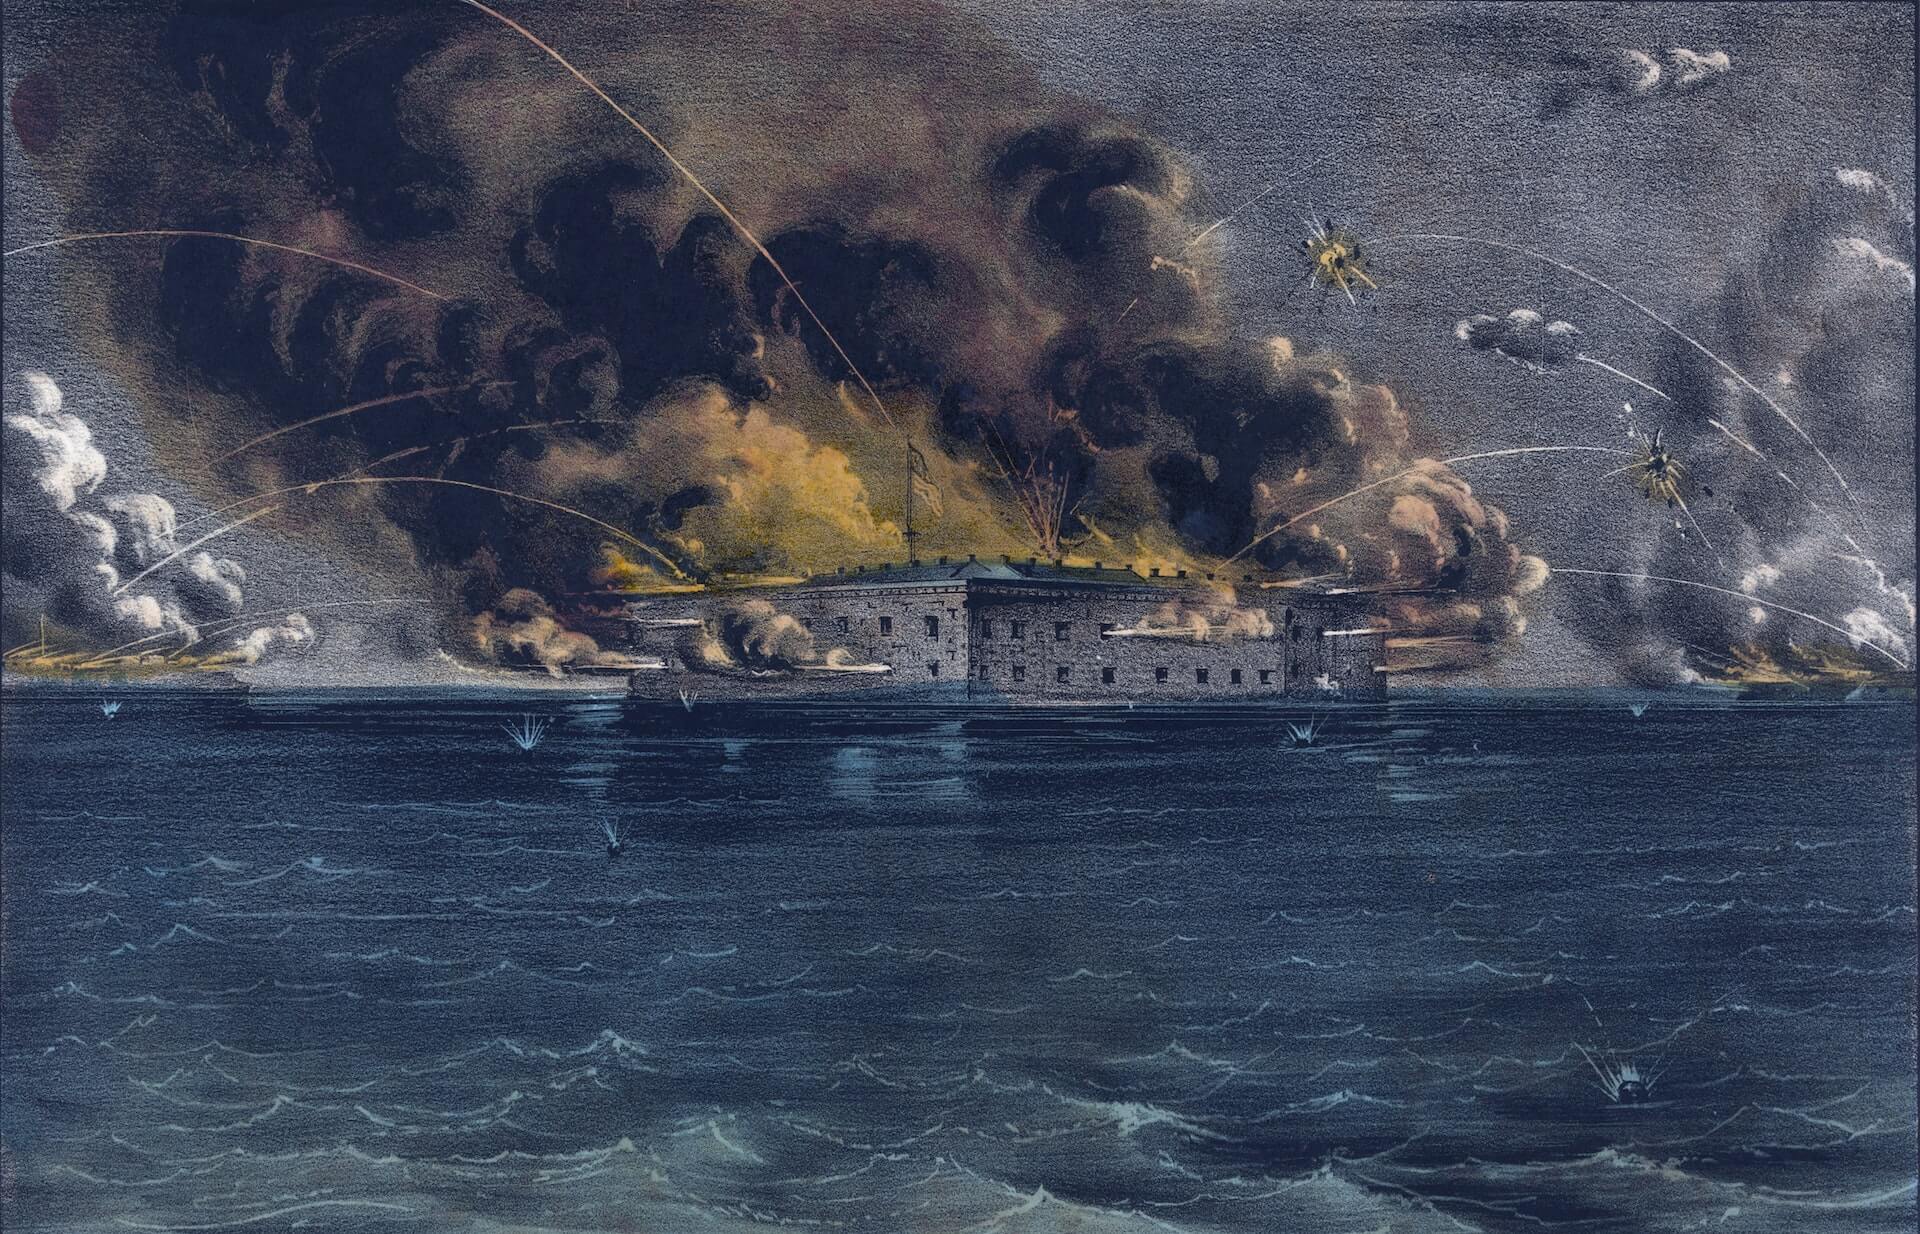 Depiction of the Bombardment of Fort Sumter